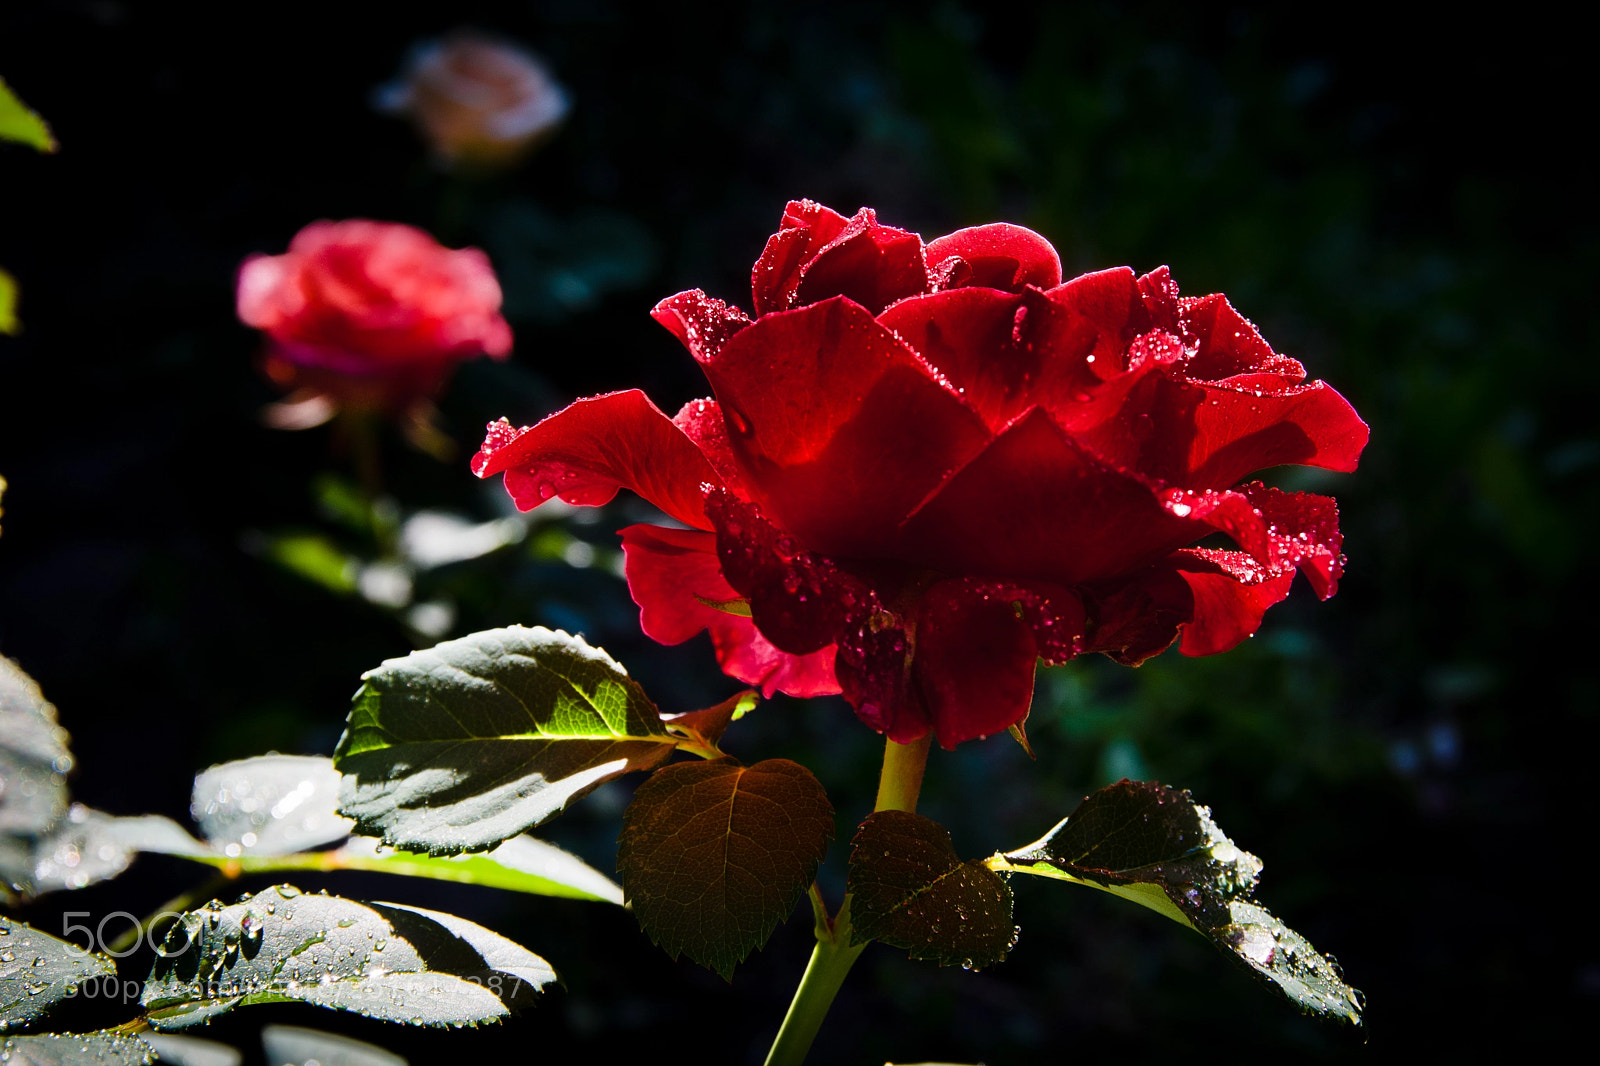 Pentax K-70 sample photo. The red candle photography